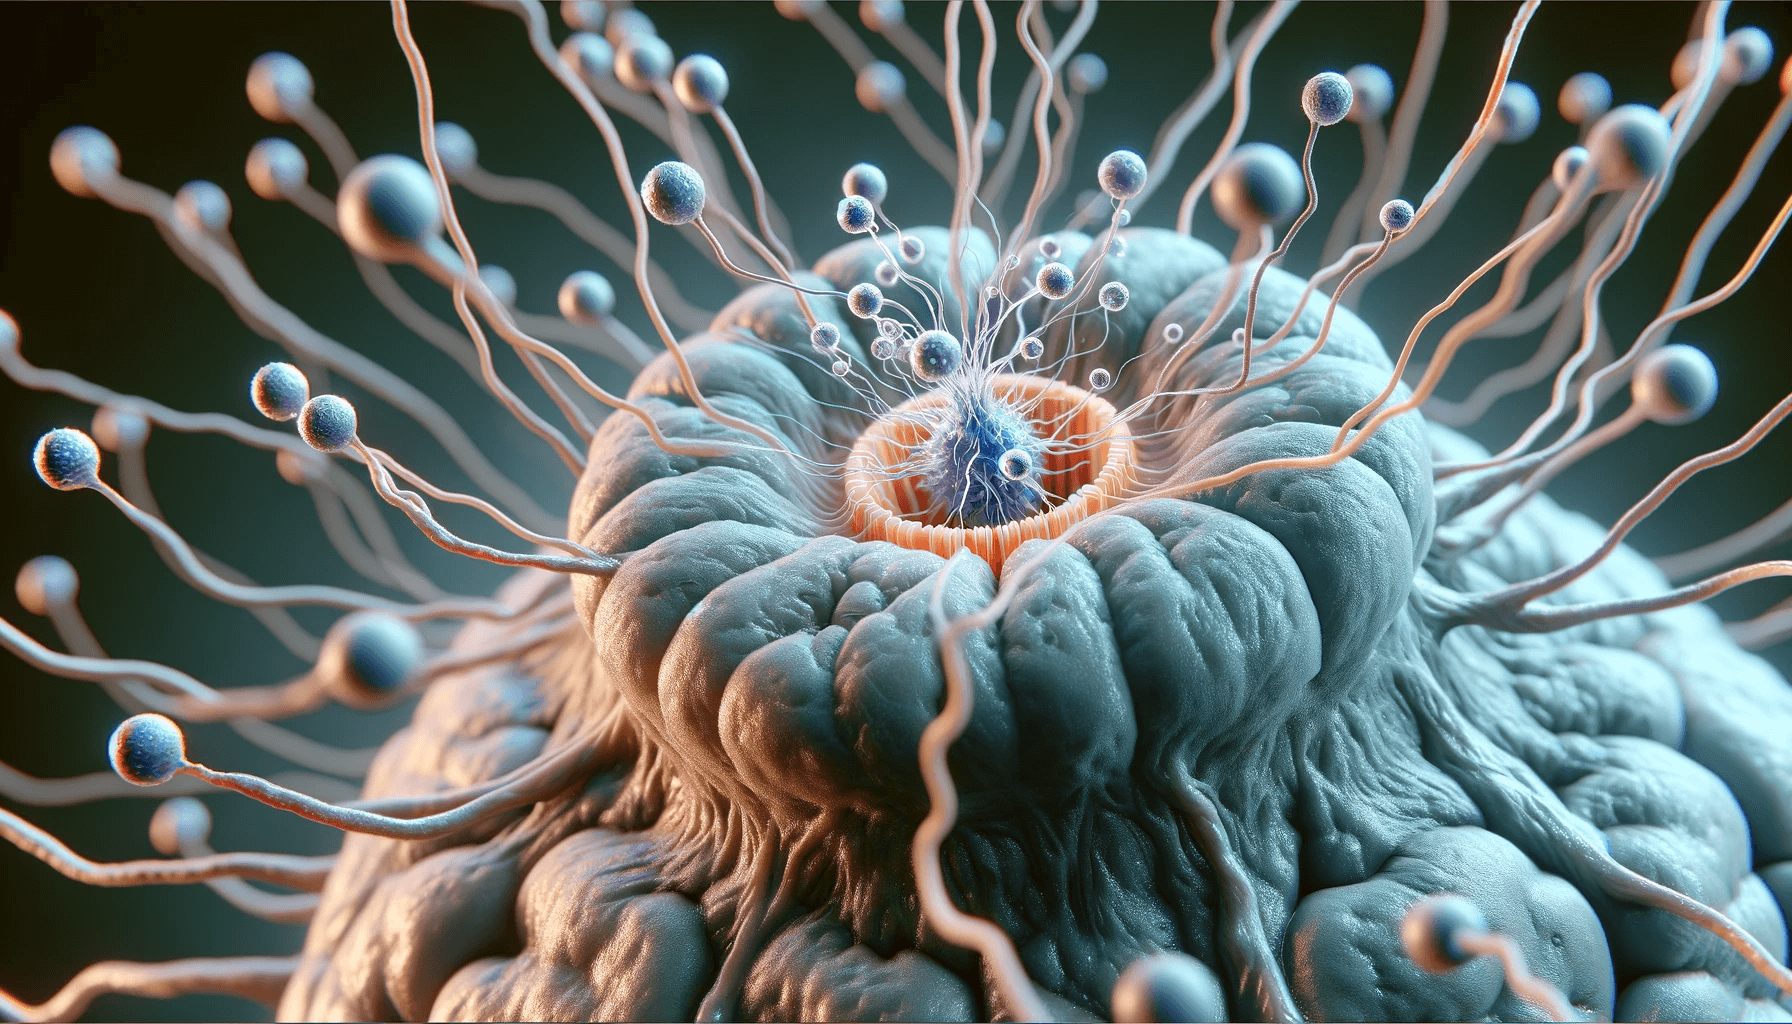 A close-up view of a brain cell with Alpha GPC molecules interacting with it showing the biological impact.